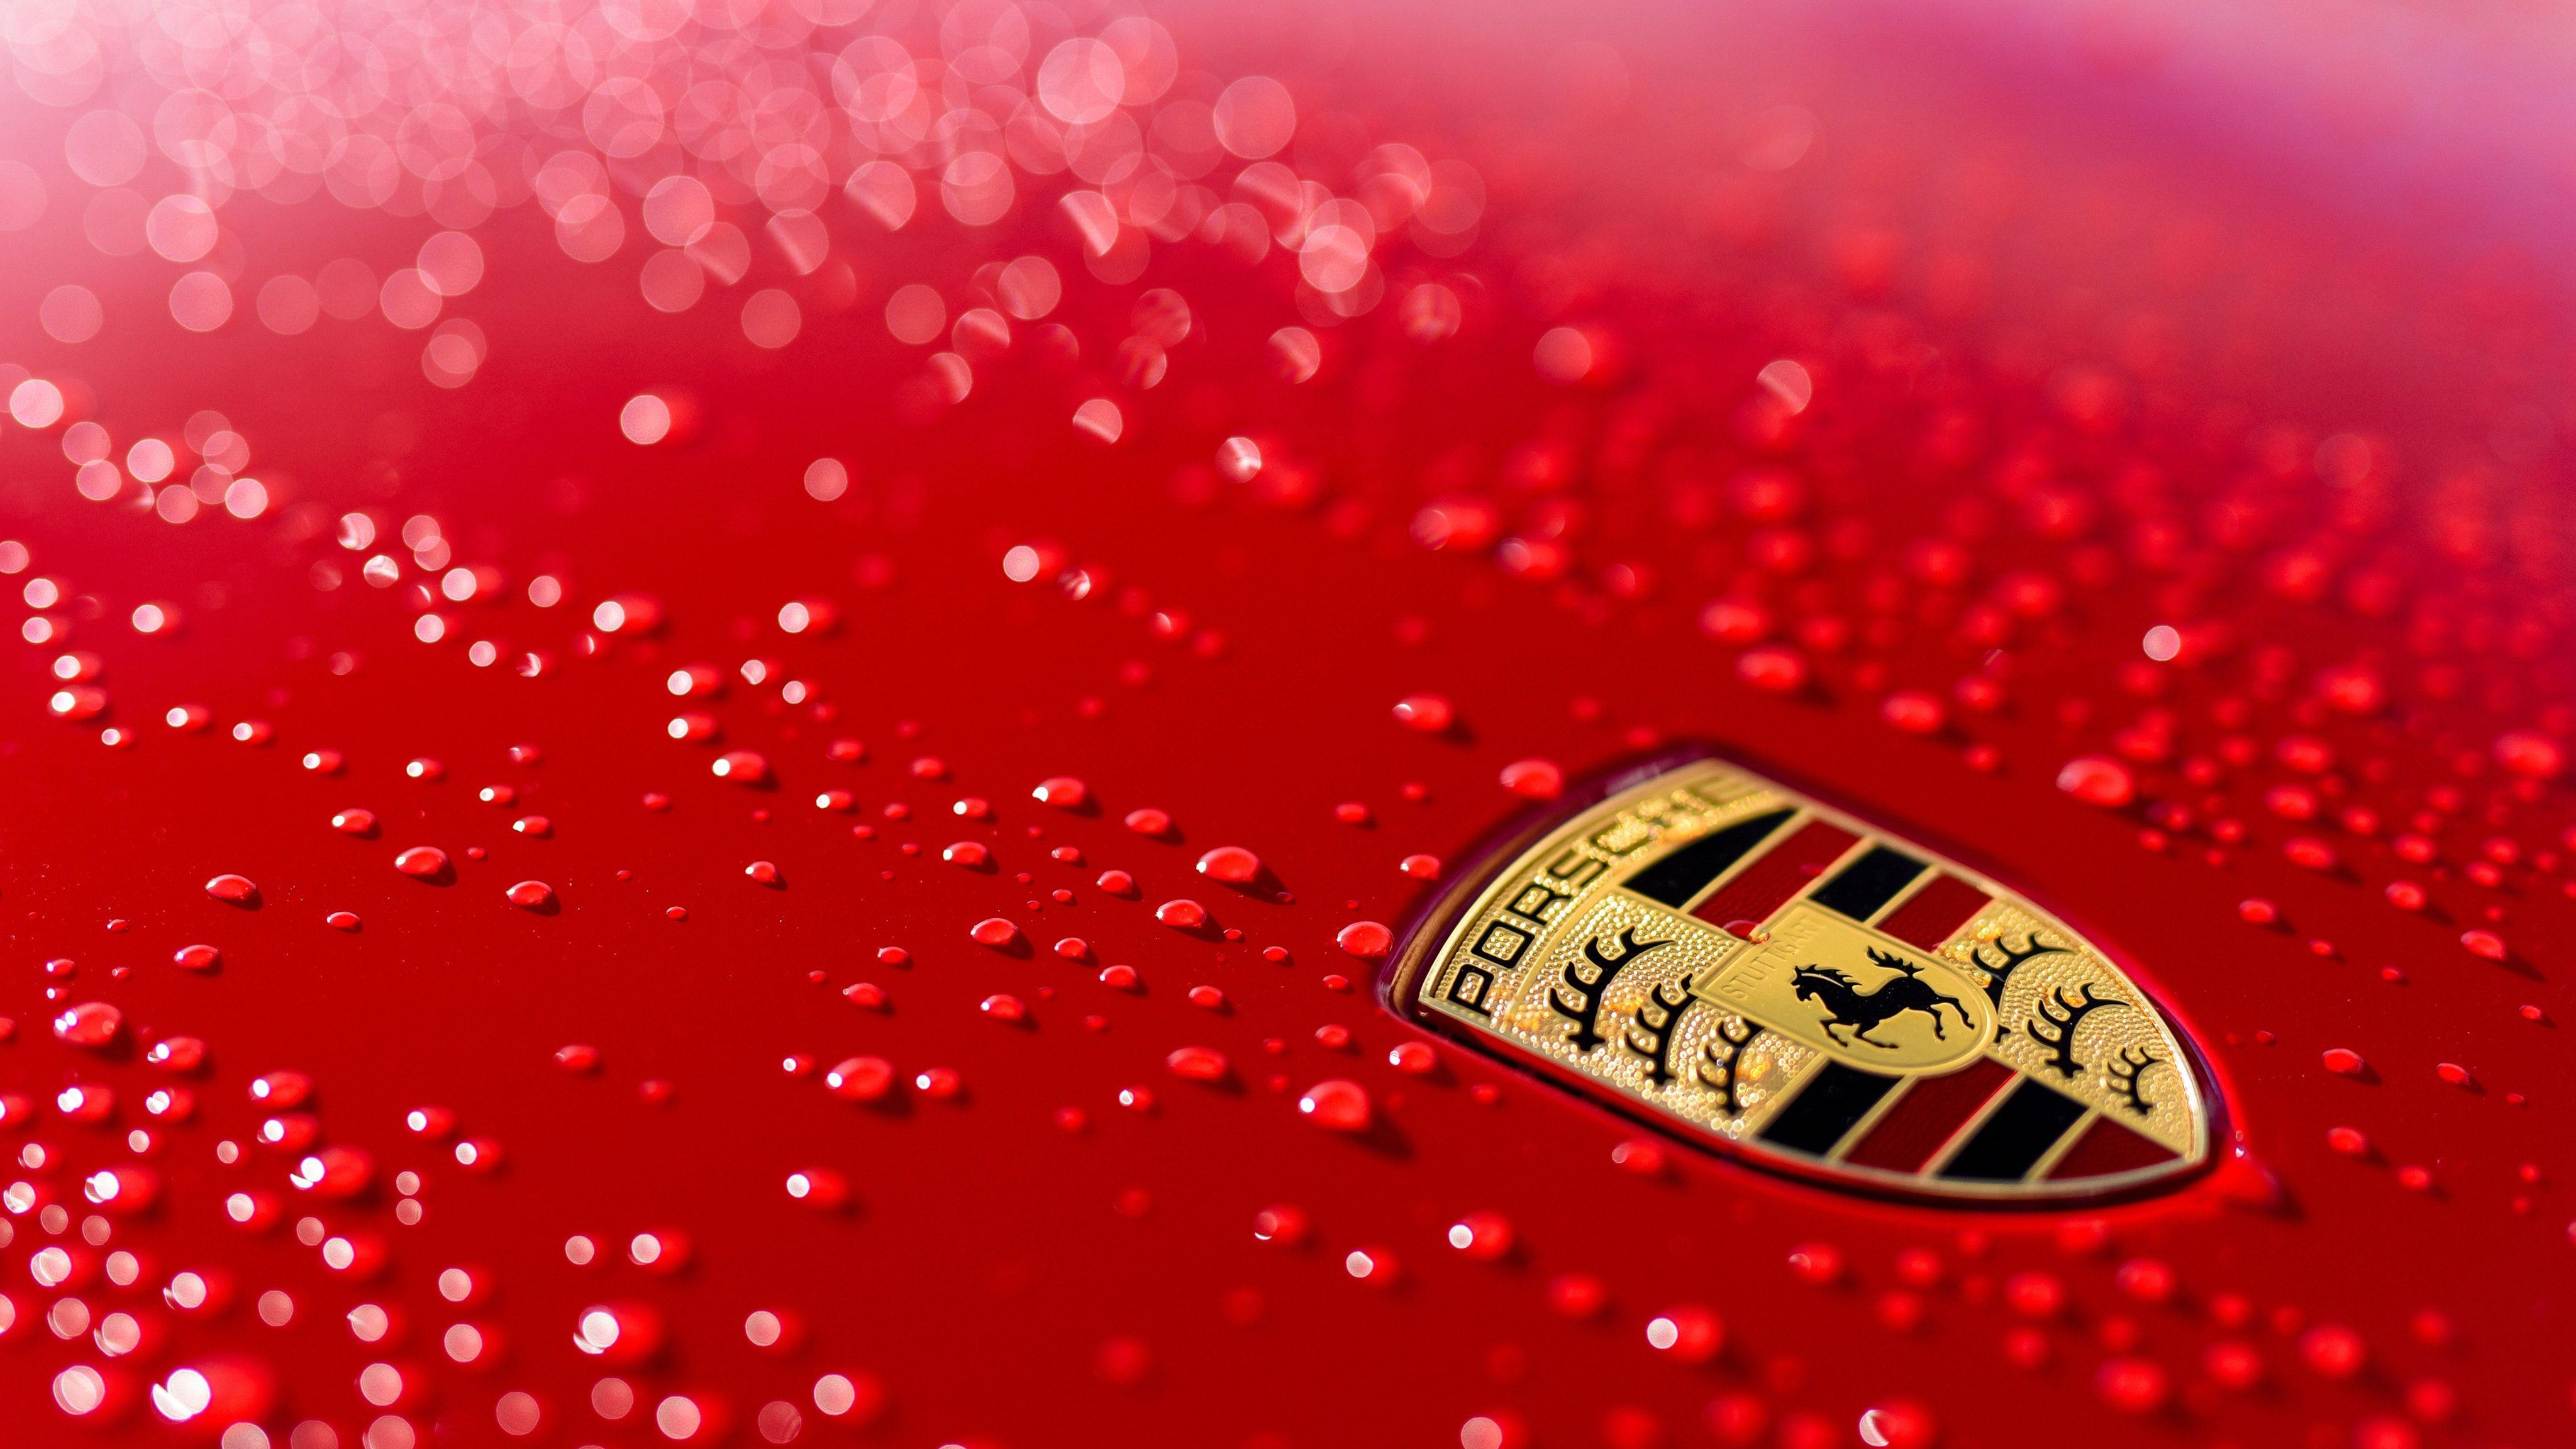 If I with Red Logo - 4K Porsche Red Logo Water Drops #2701 Wallpapers and Free Stock ...